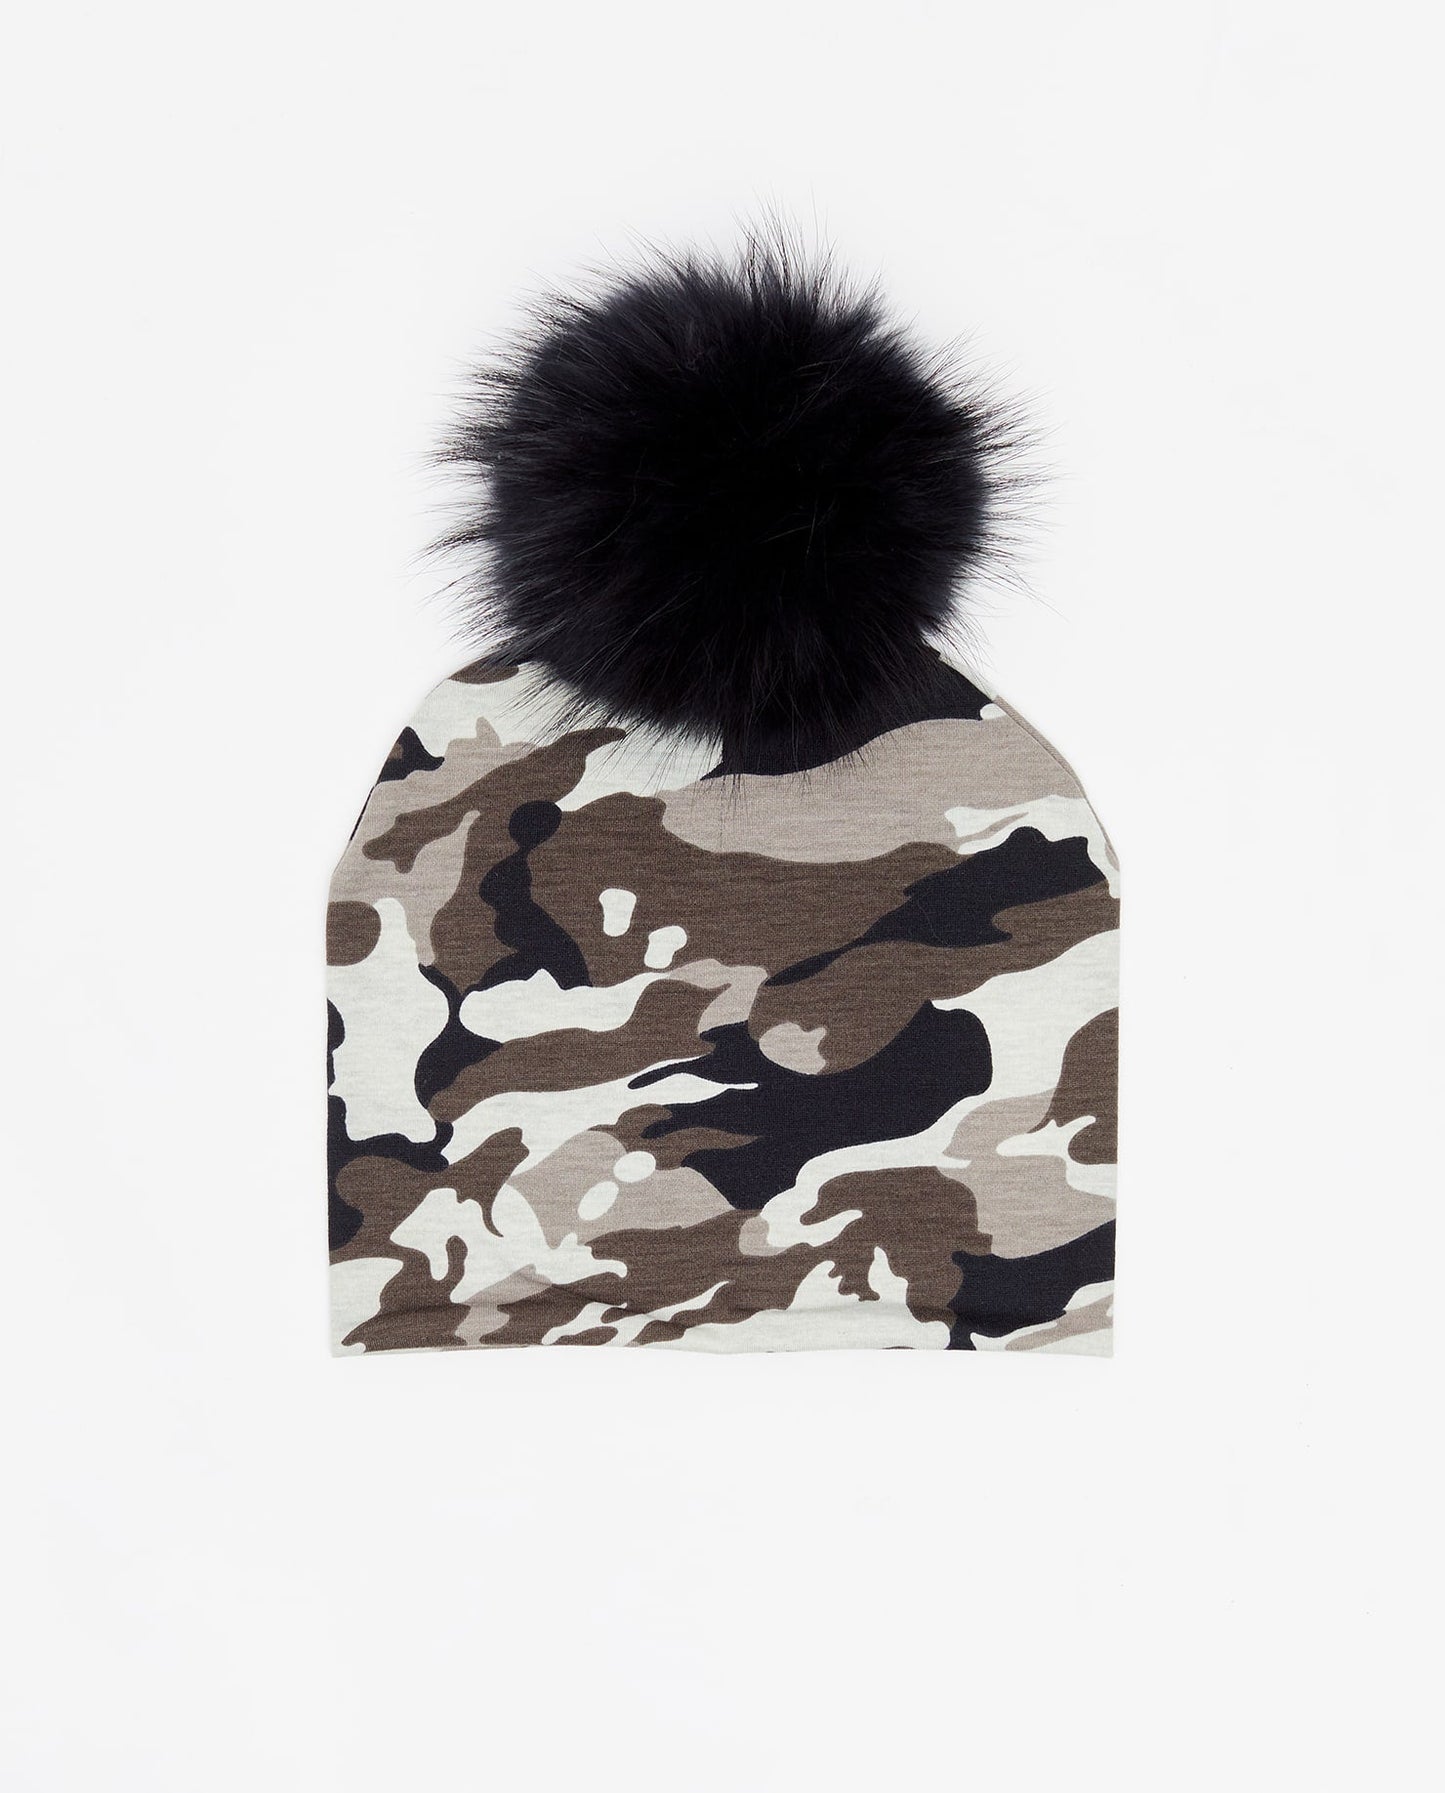 Tuque Adulte Coton Winter Army